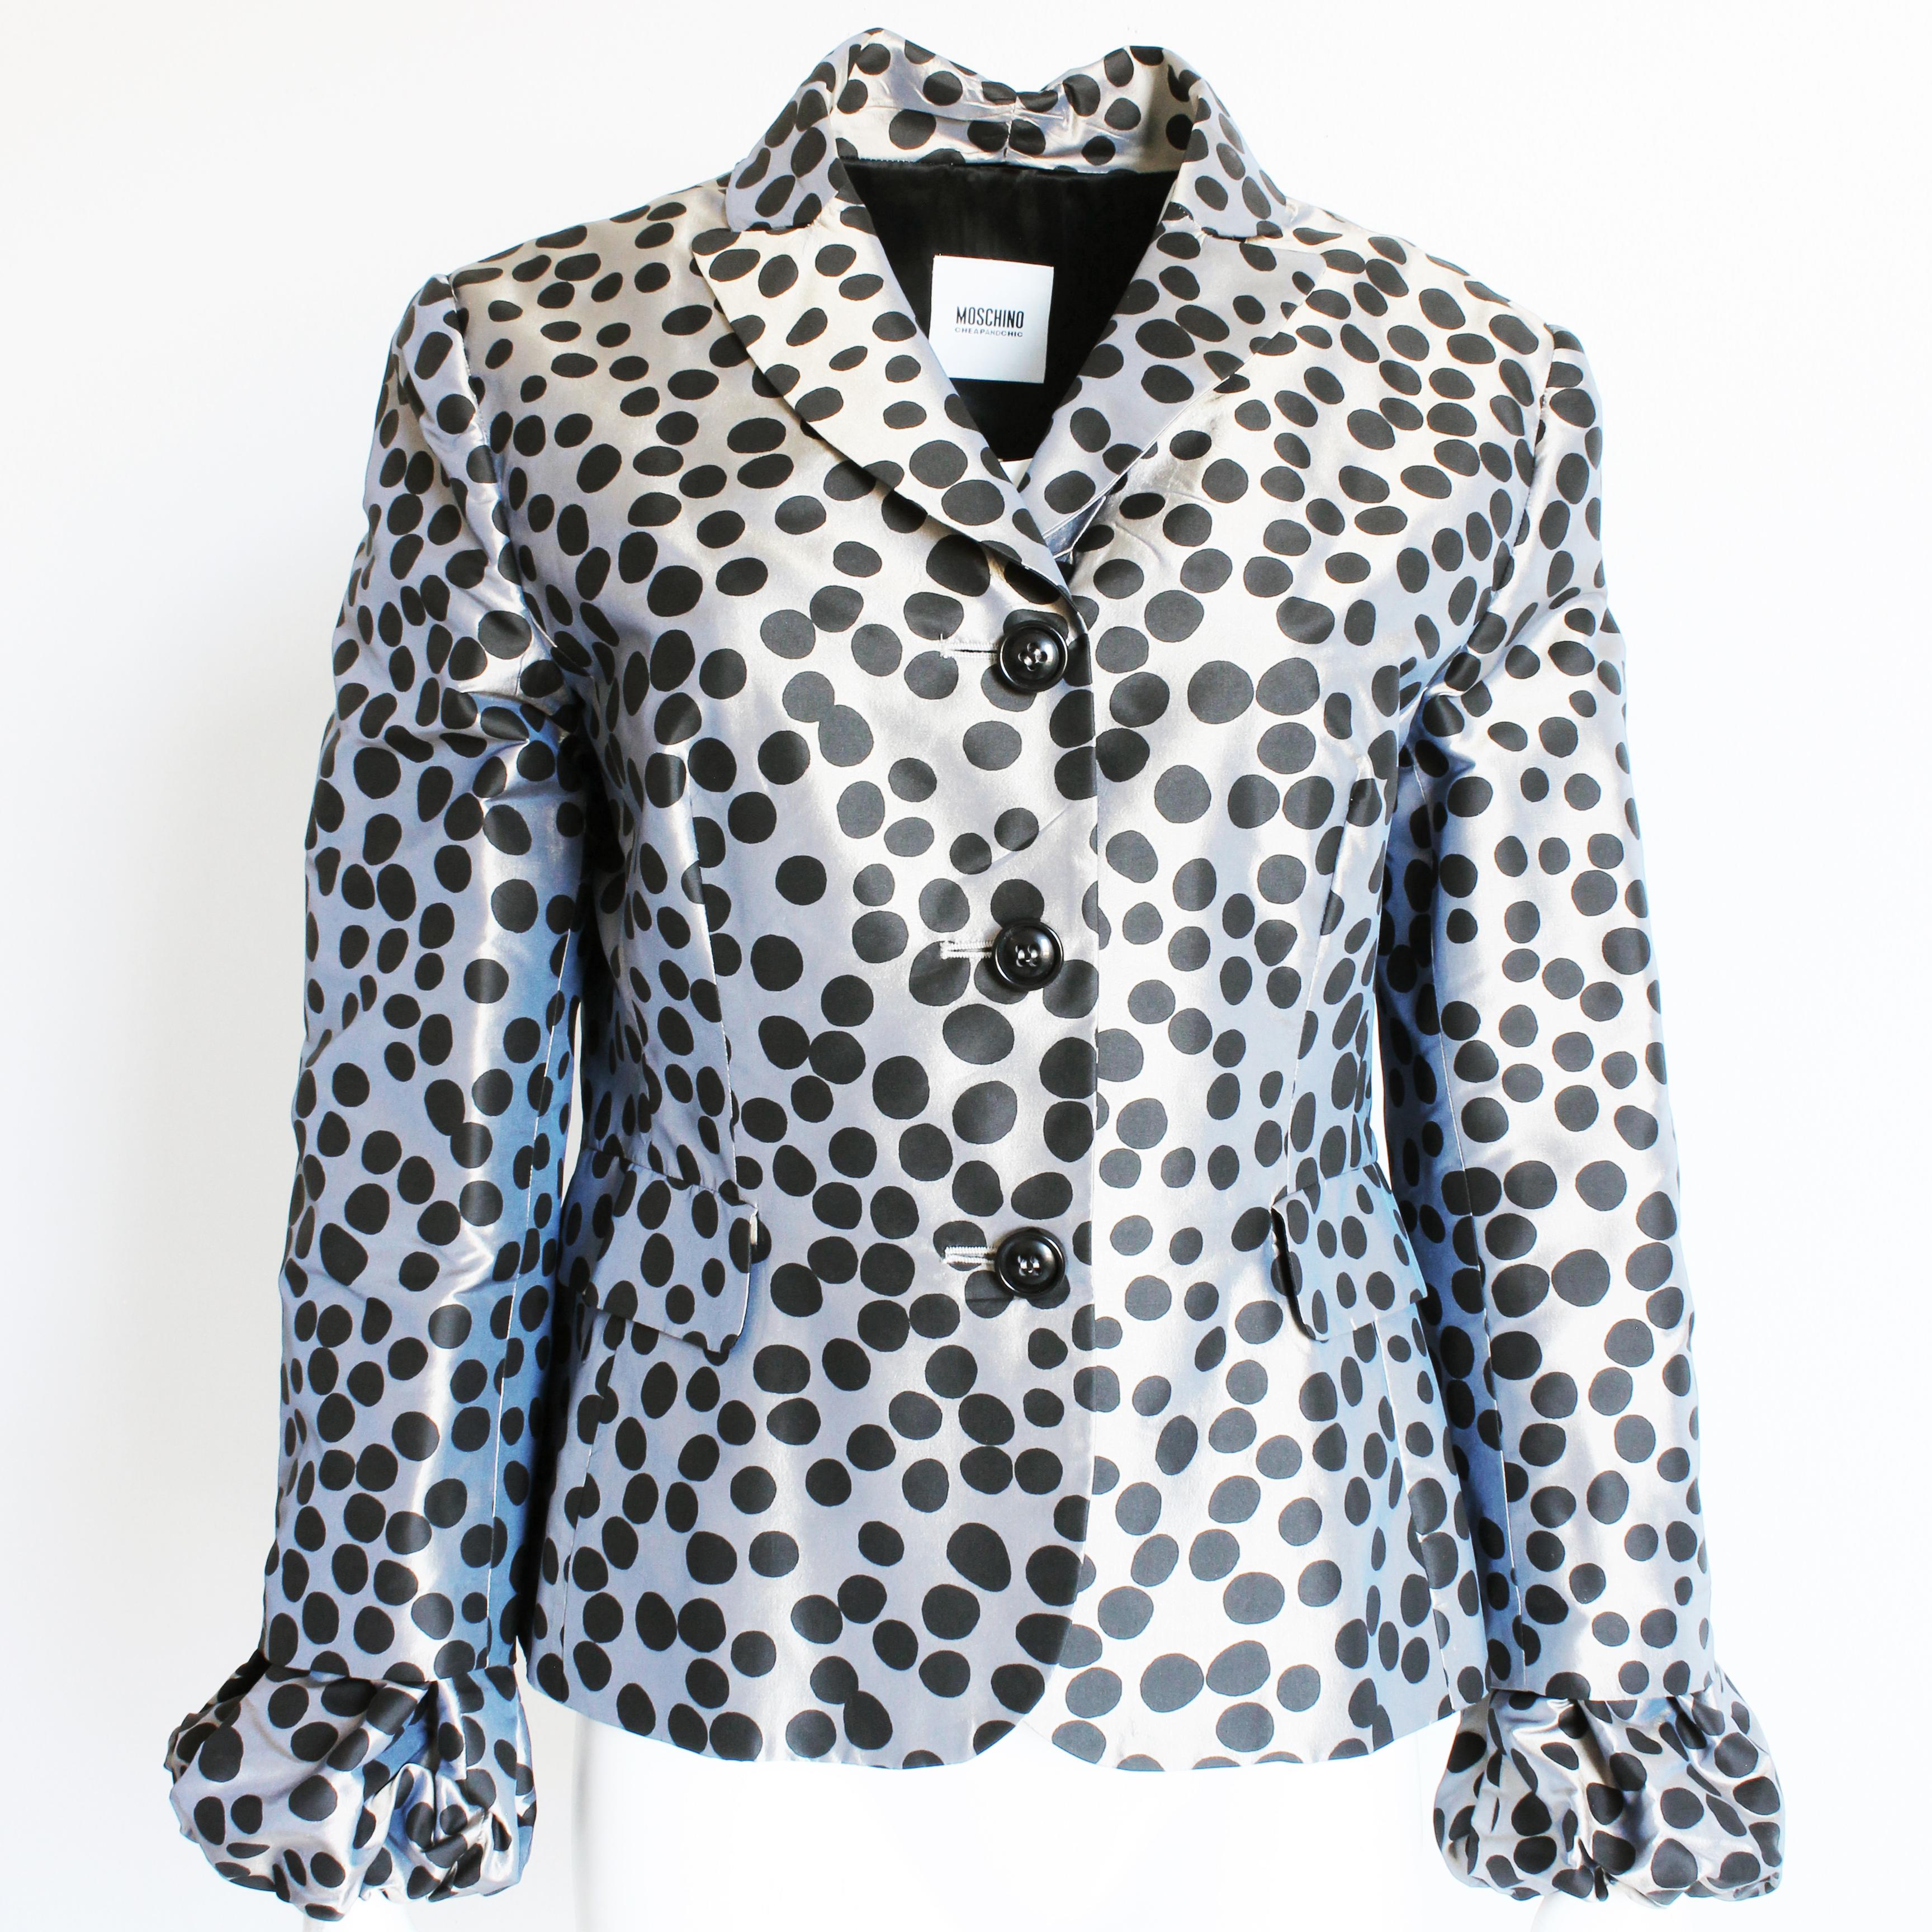 Authentic, preowned Moschino jacket, likely made in the late 2000s for their Cheap and Chic line.  Made from a gunmetal-silver silk fabric with black polka dots, it features elasticized puff sleeve cuffs and a flared hem.  

Fabulously chic and so